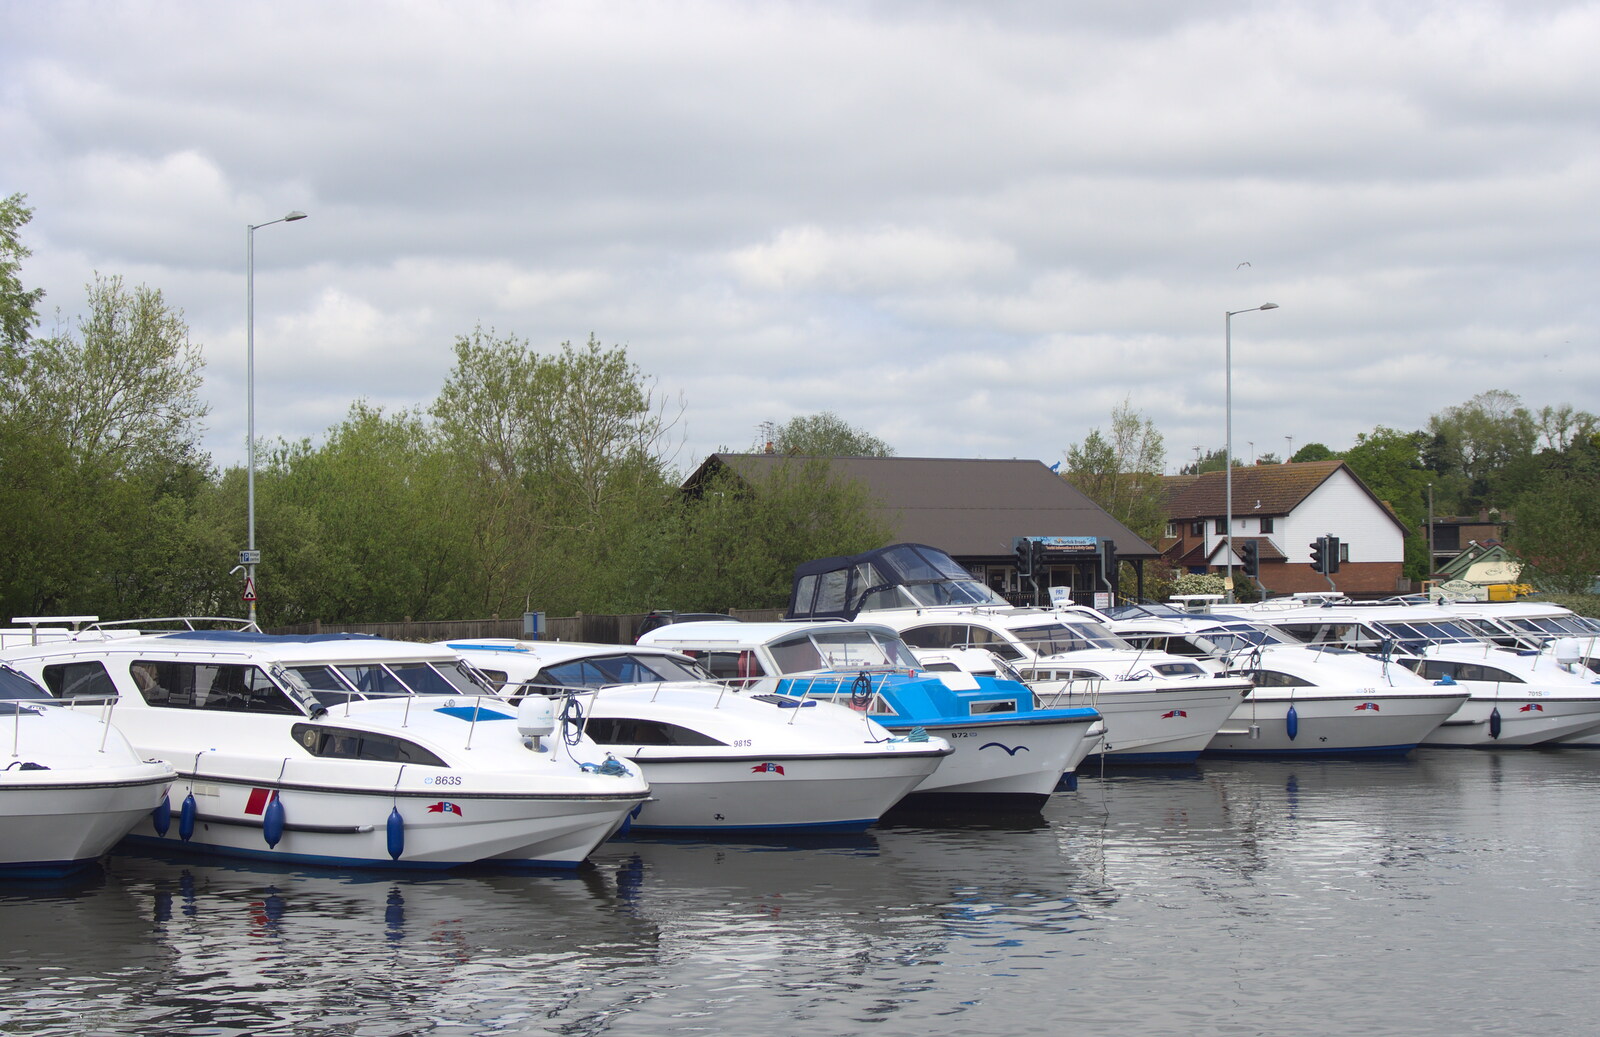 Fancy cruisers at Wroxham Marina from A Trip on the Norfolk Broads, Wroxham, Norfolk - 25th May 2013